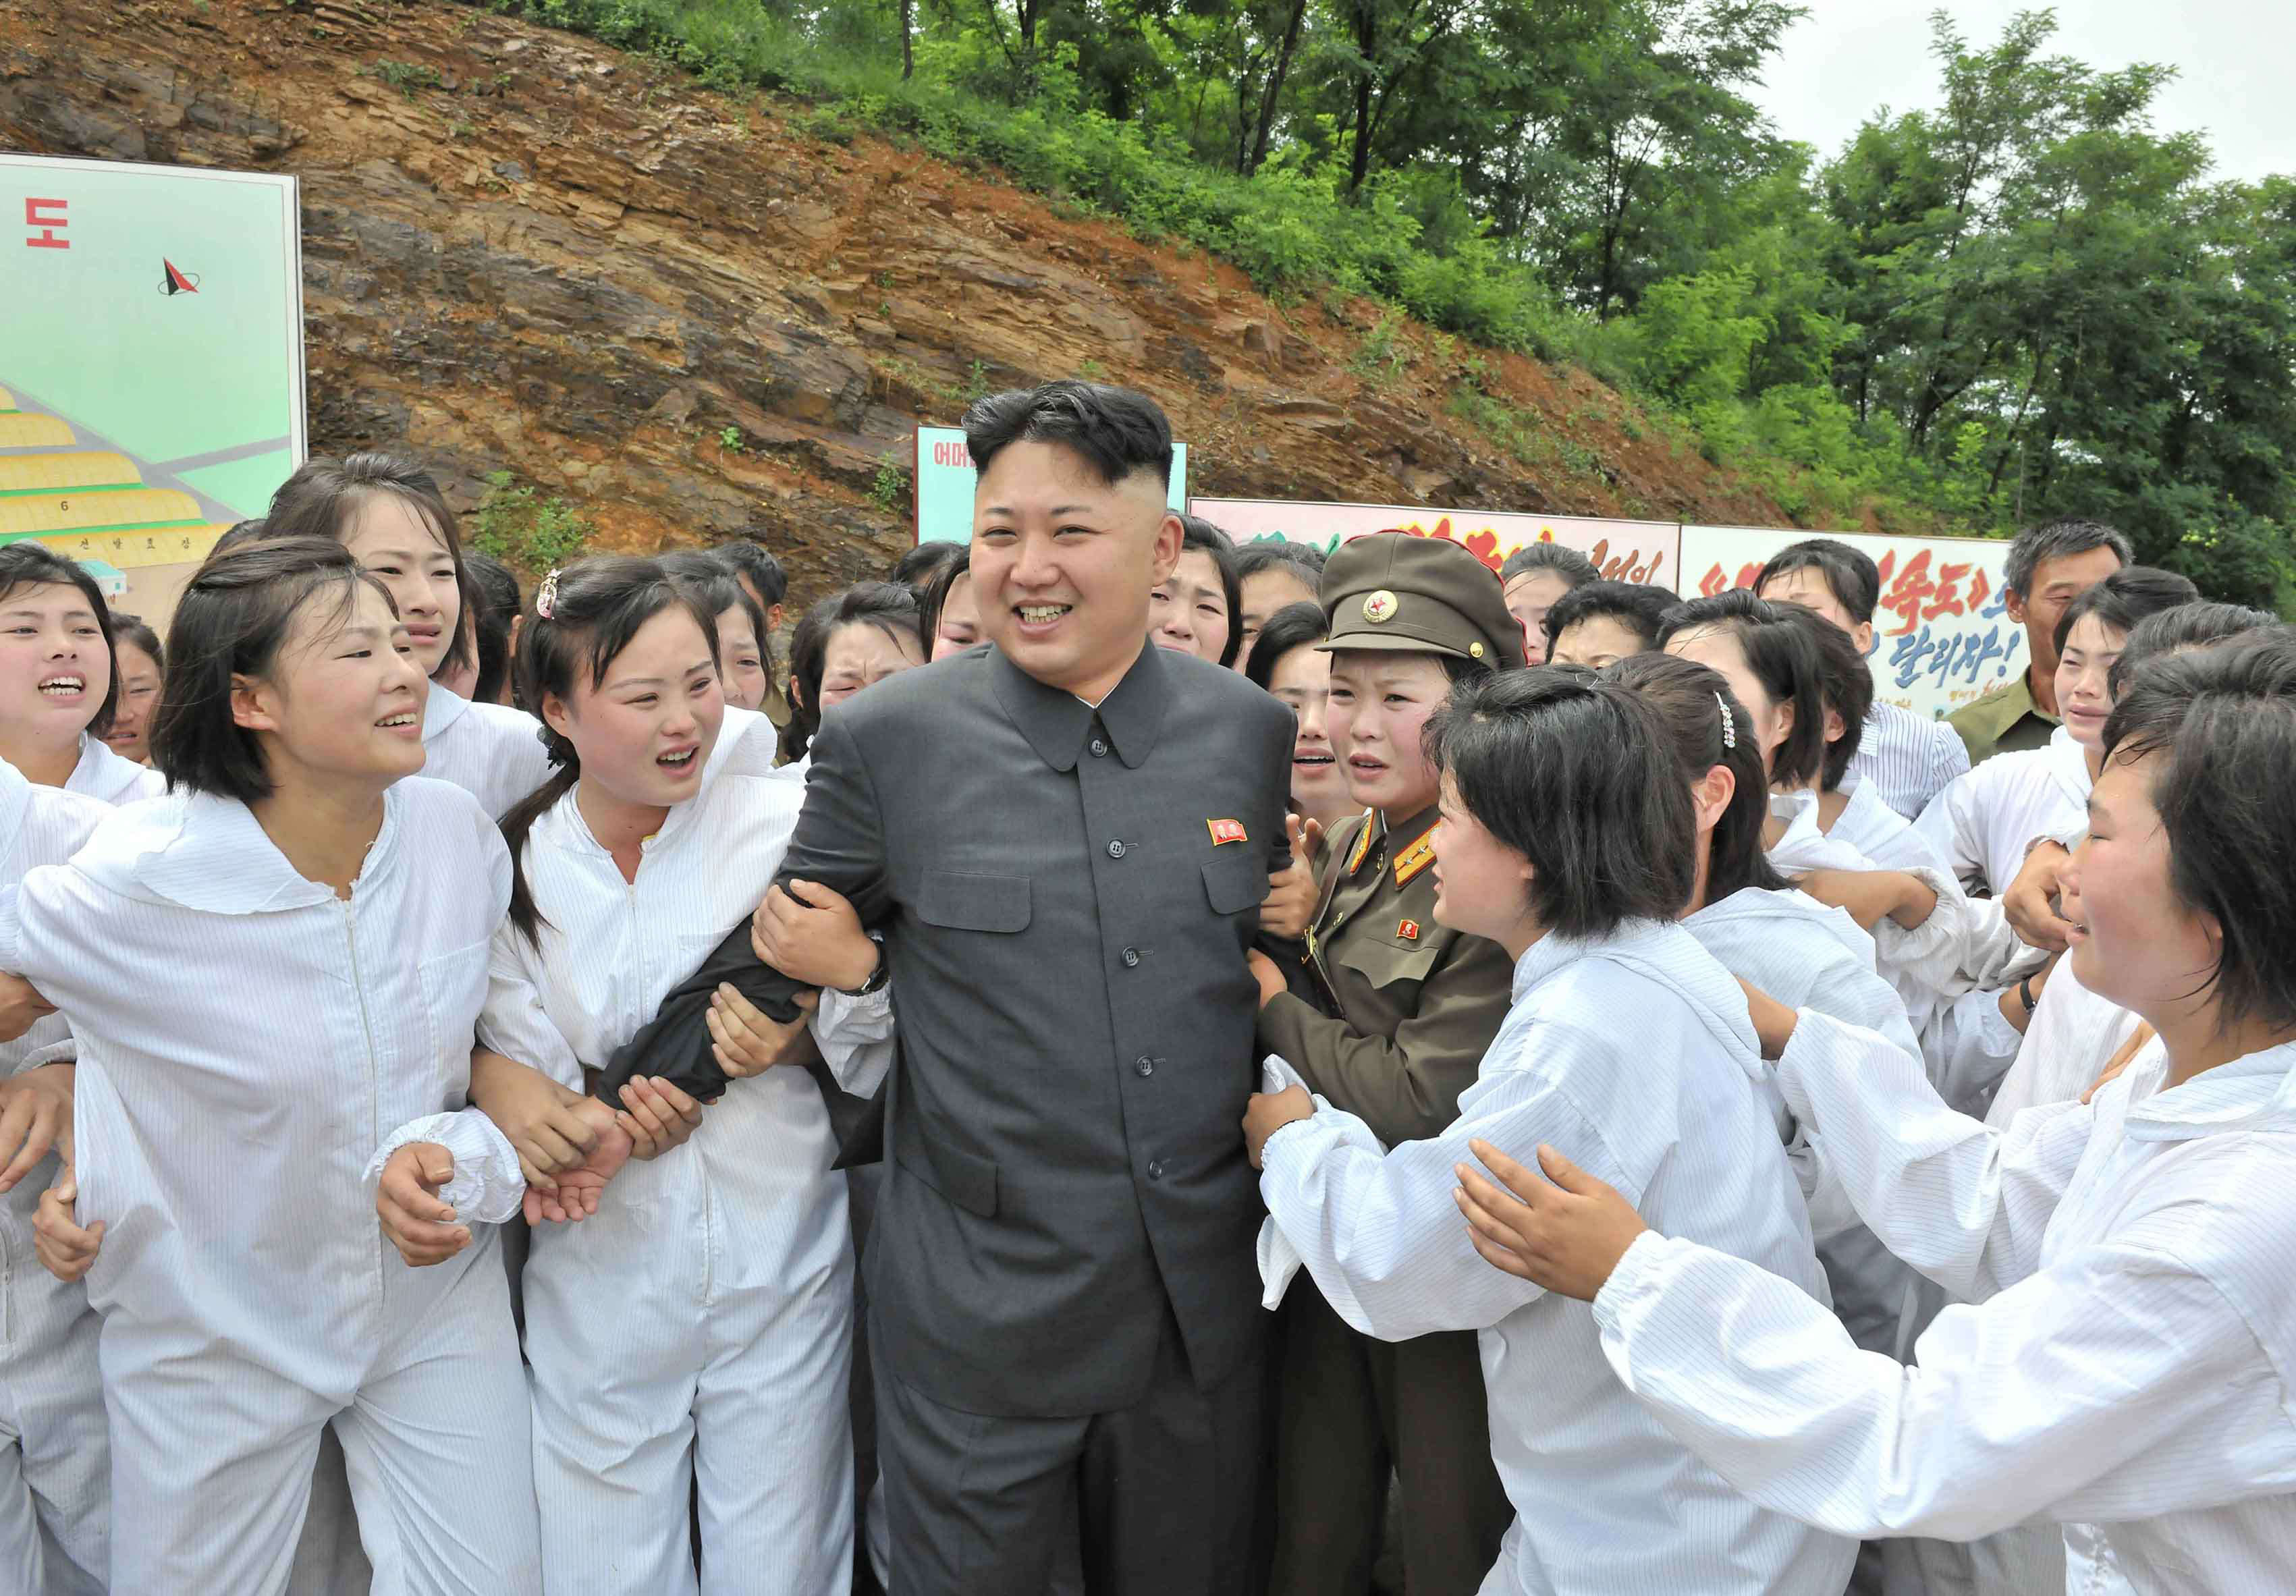 These are the pictures of Kim Jong Un's first public appearance after rumours he was dead